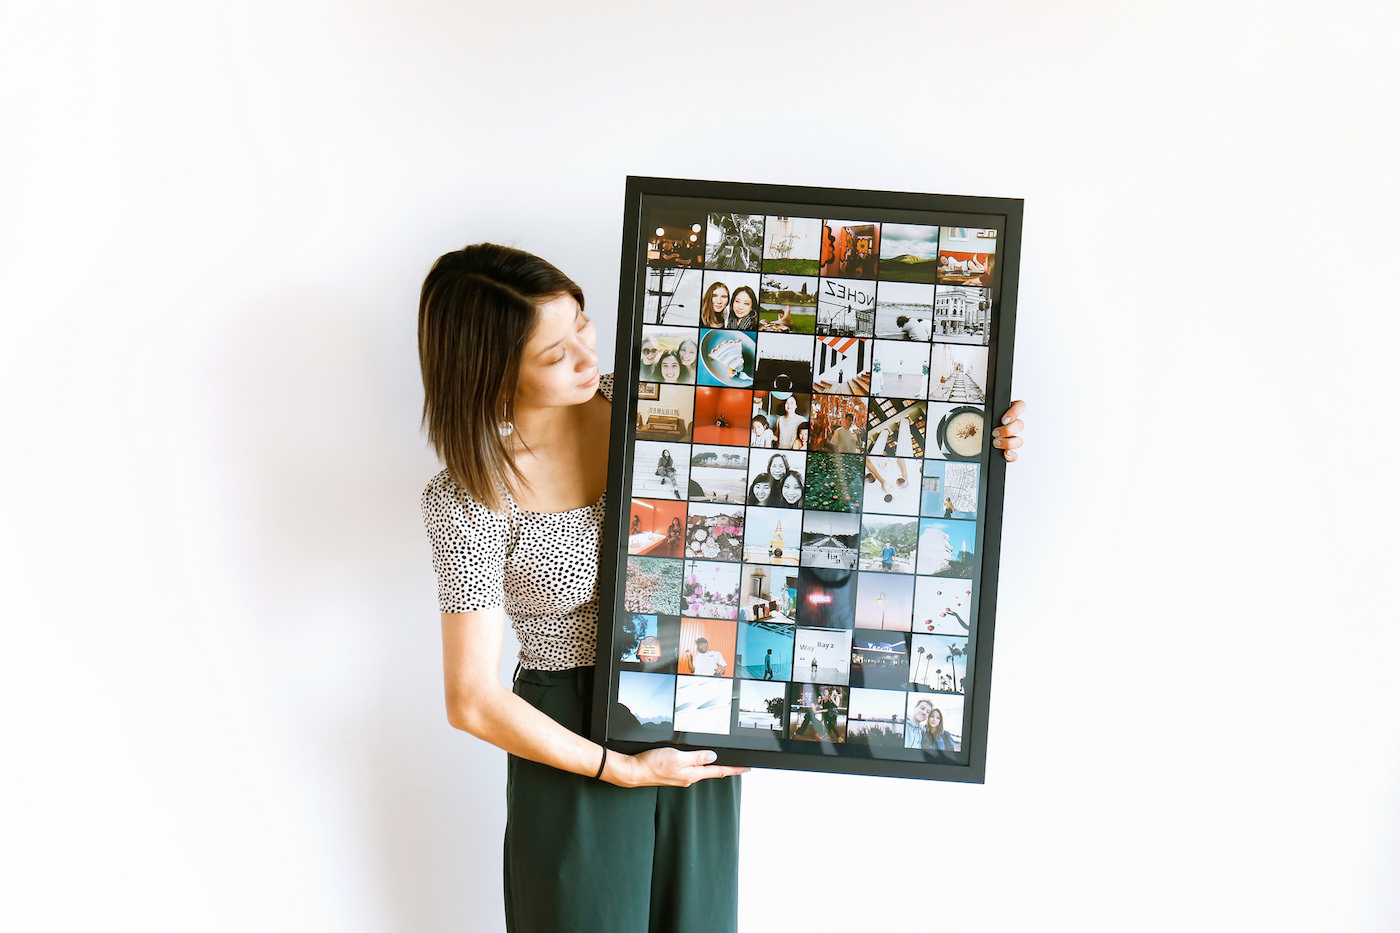 Instagram Grid Poster Print Your Instagram Photos On A Poster Social Print Studio